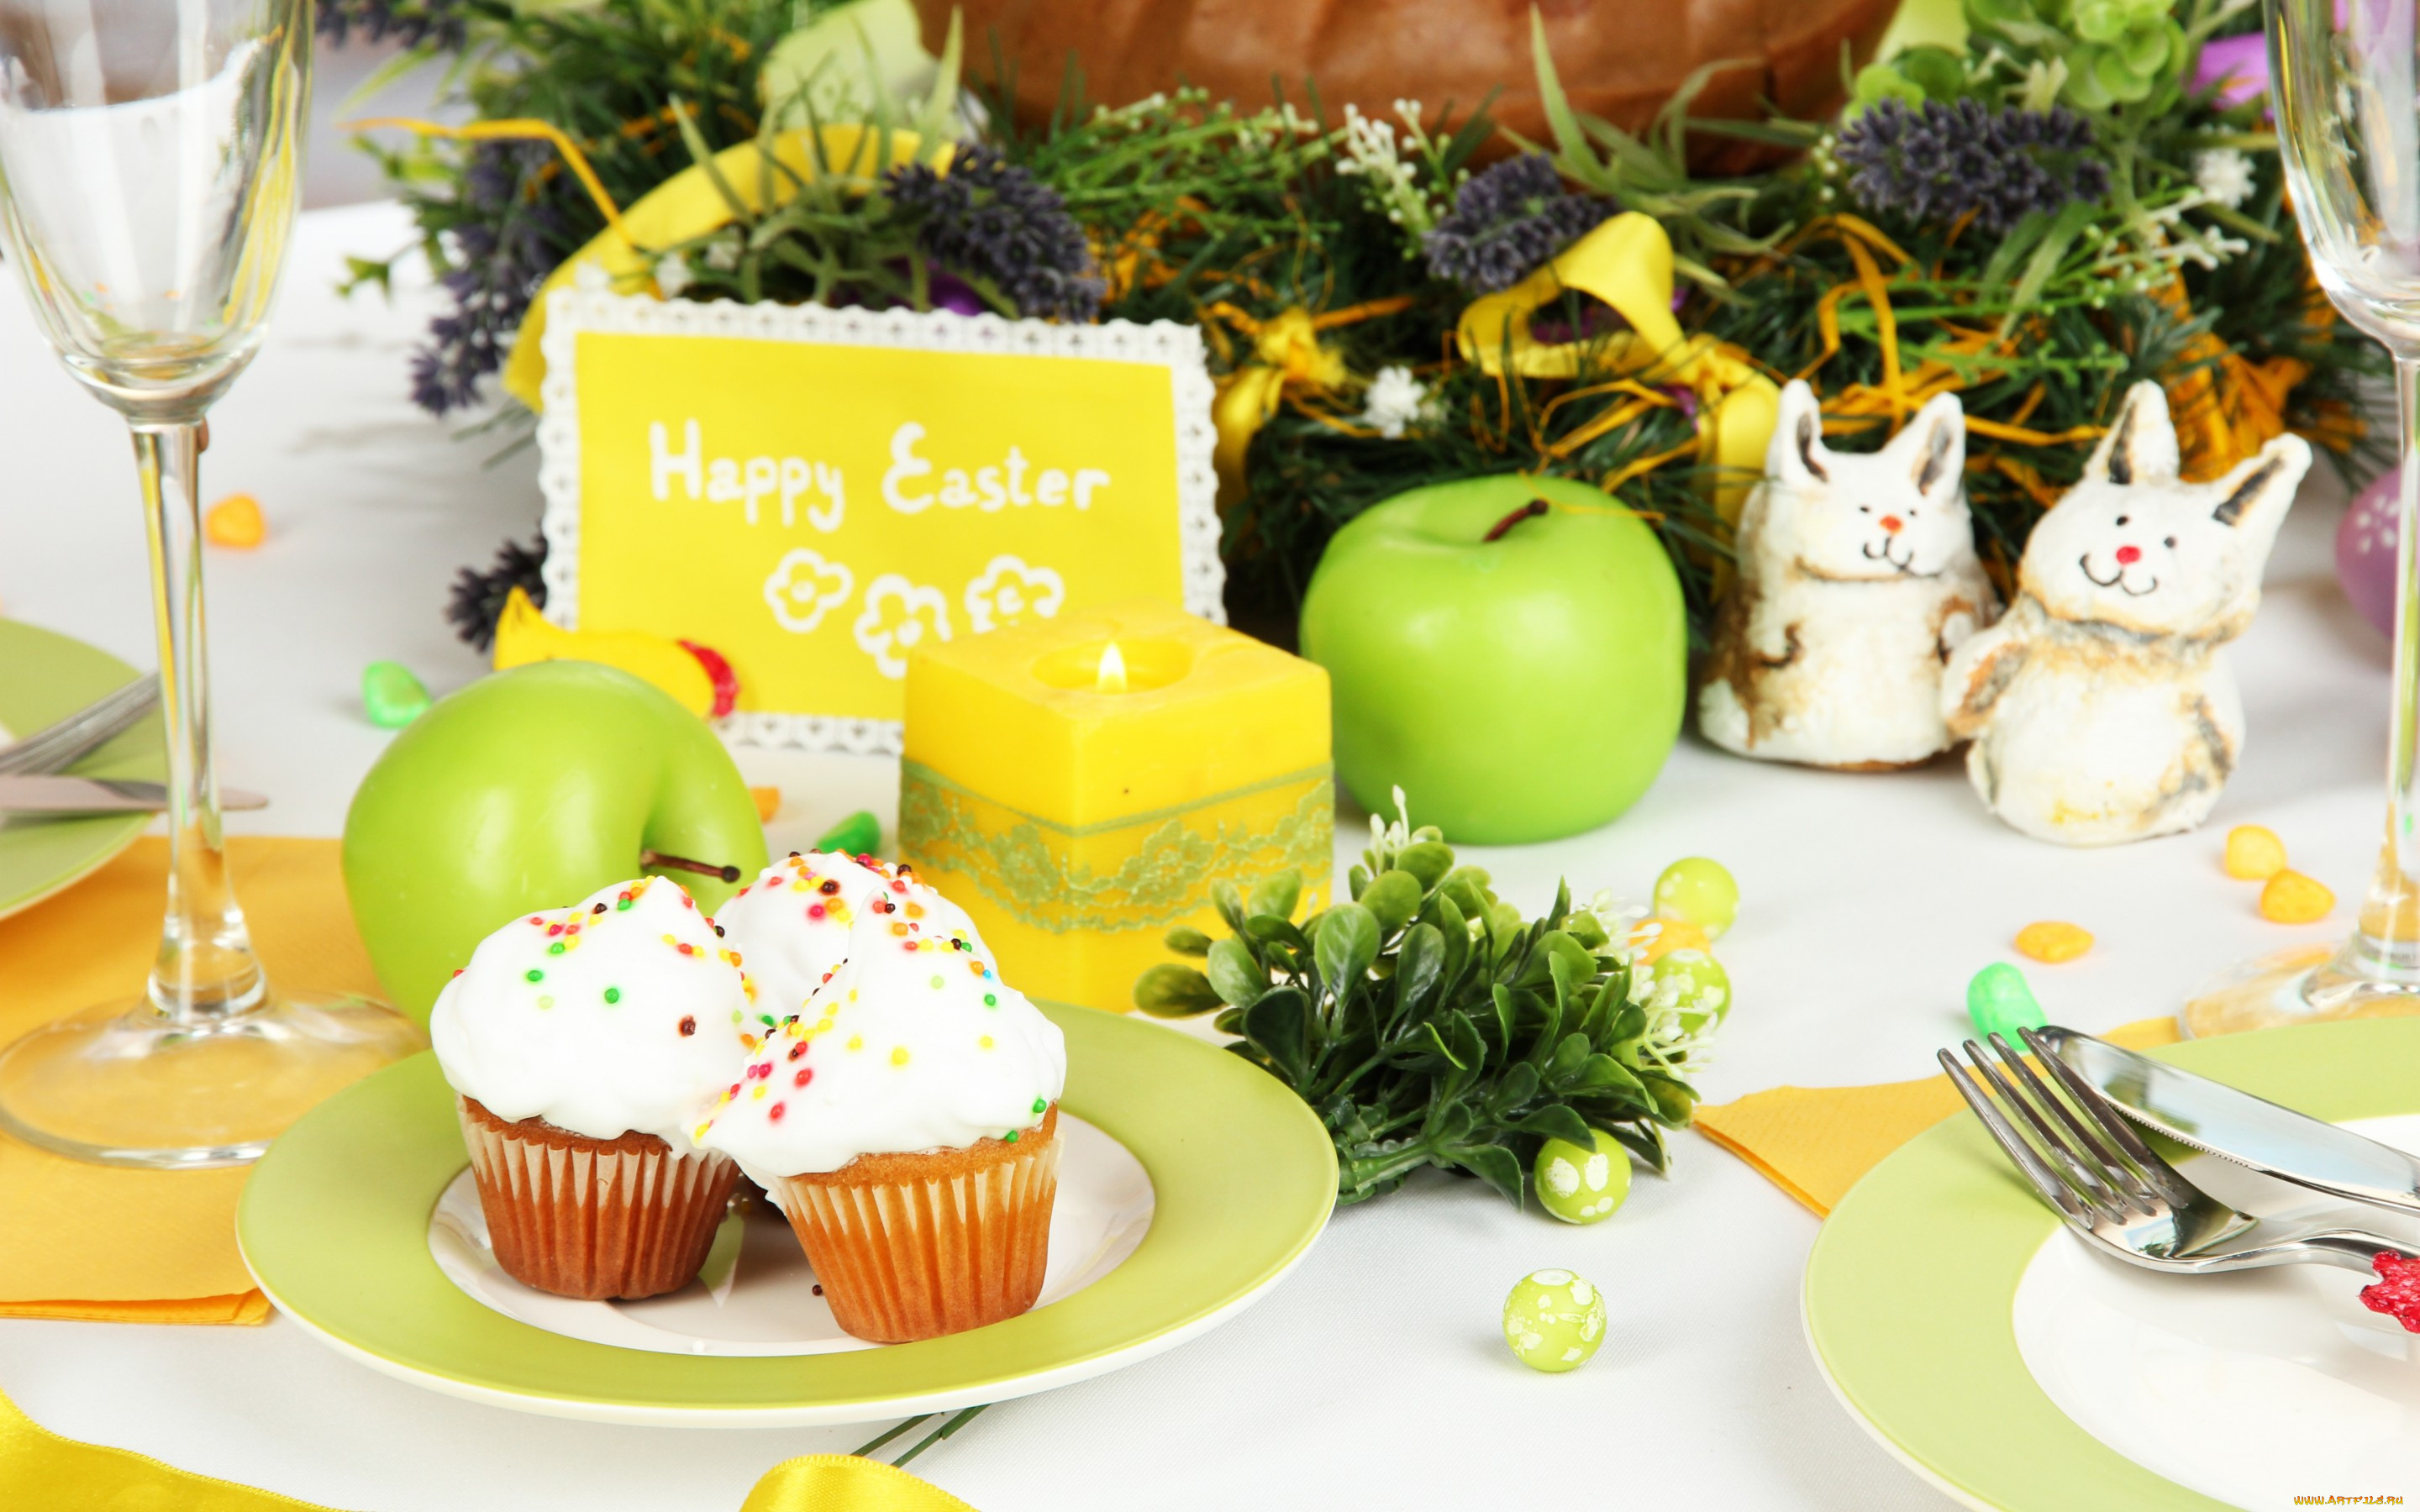 , , cake, flowers, eggs, , blessed, holiday, , , , easter